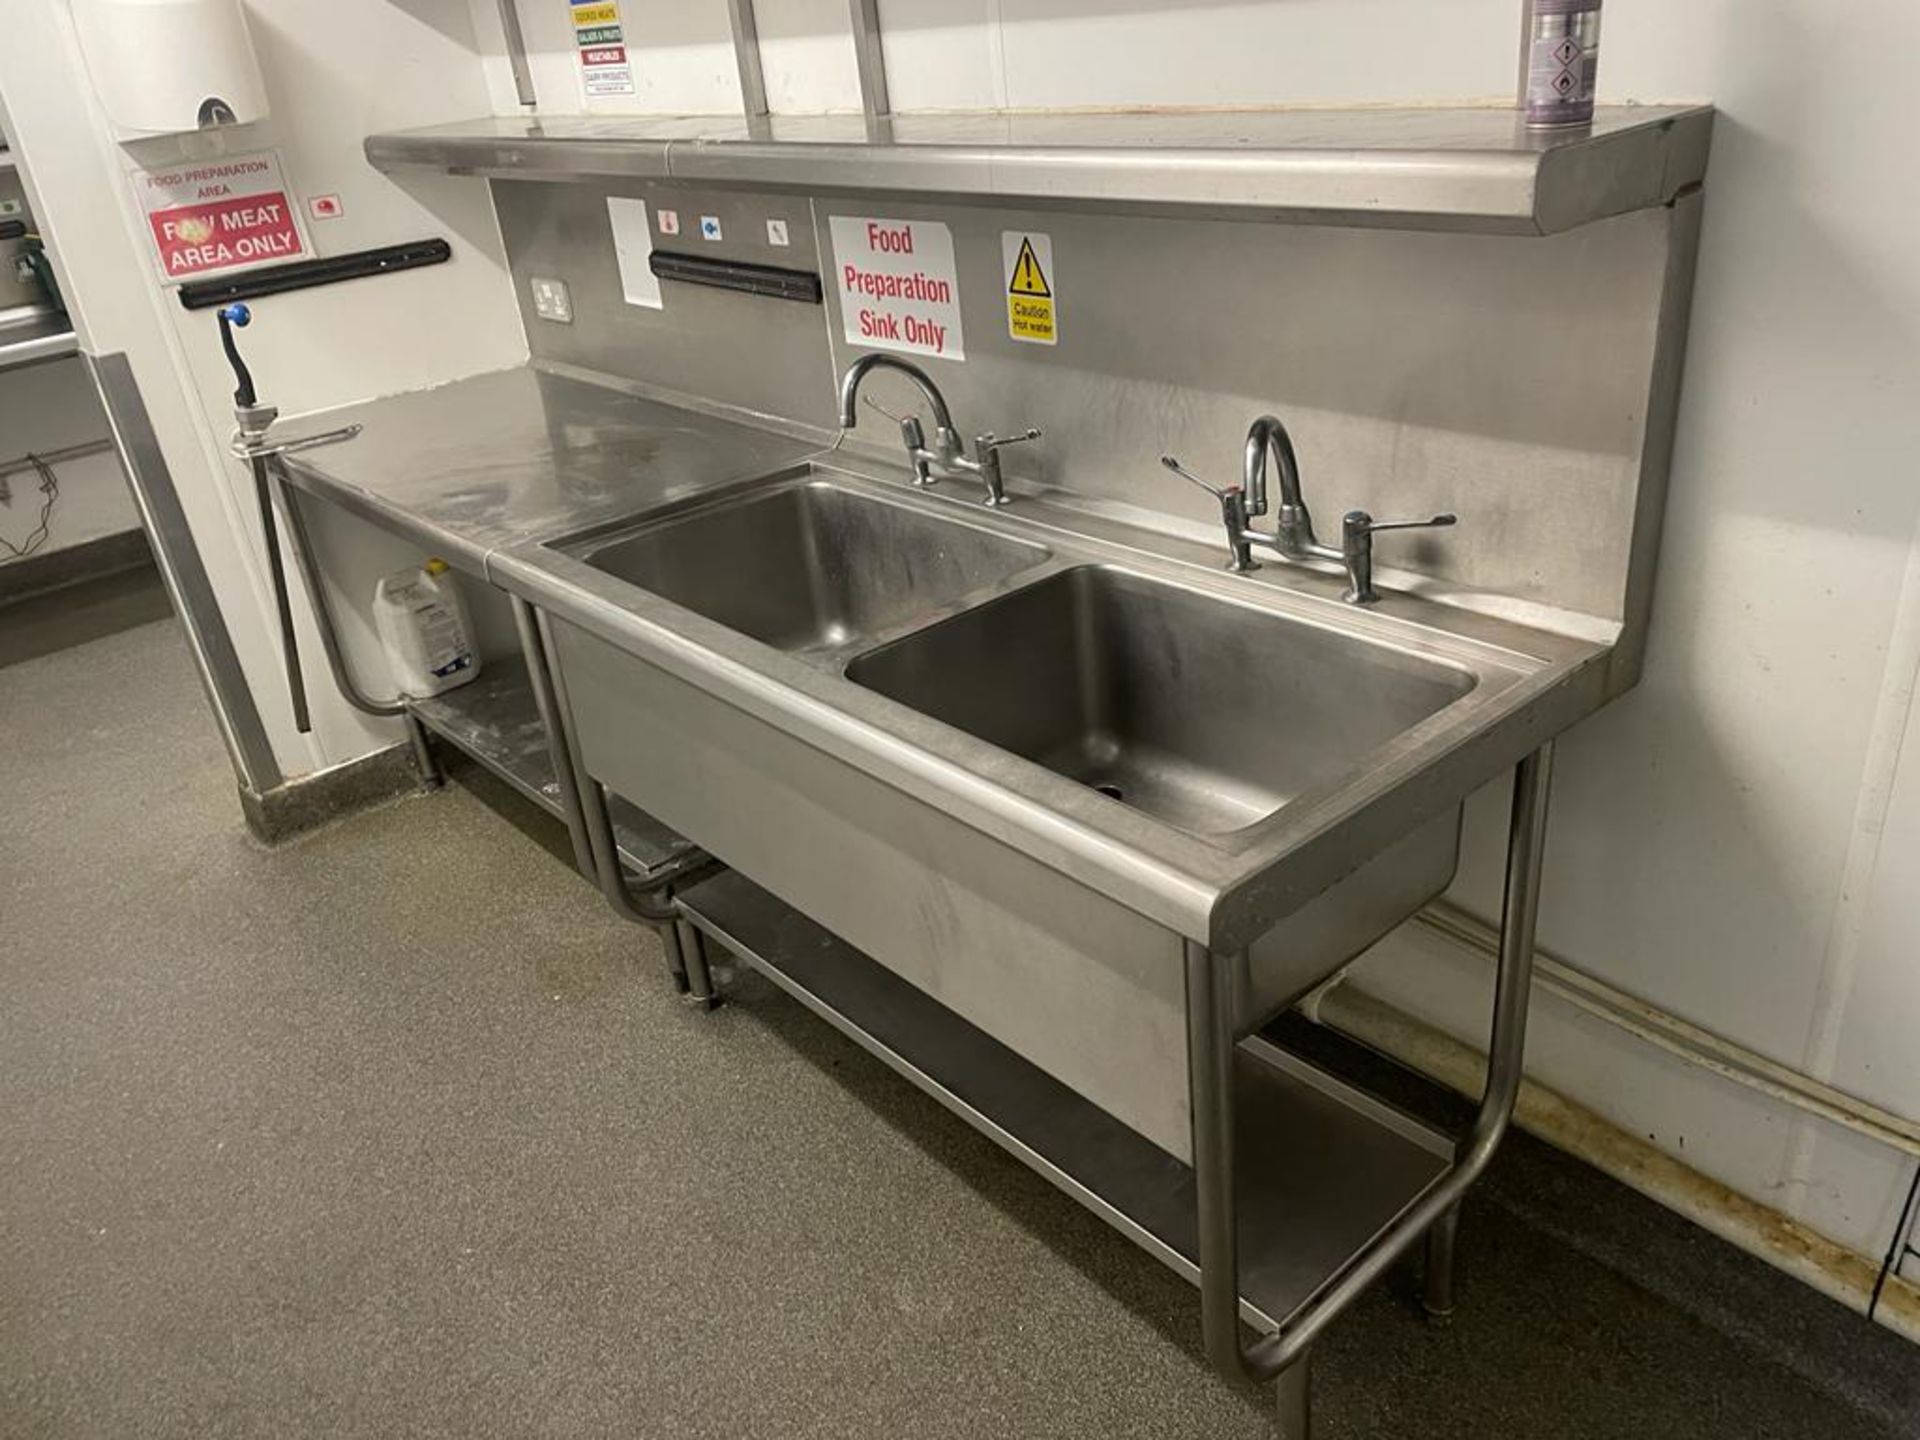 1 x Stainless Steel Commercial Wash Stand With Twin Sink Basins, Mixer Taps, Overhead Shelves, - Image 7 of 10